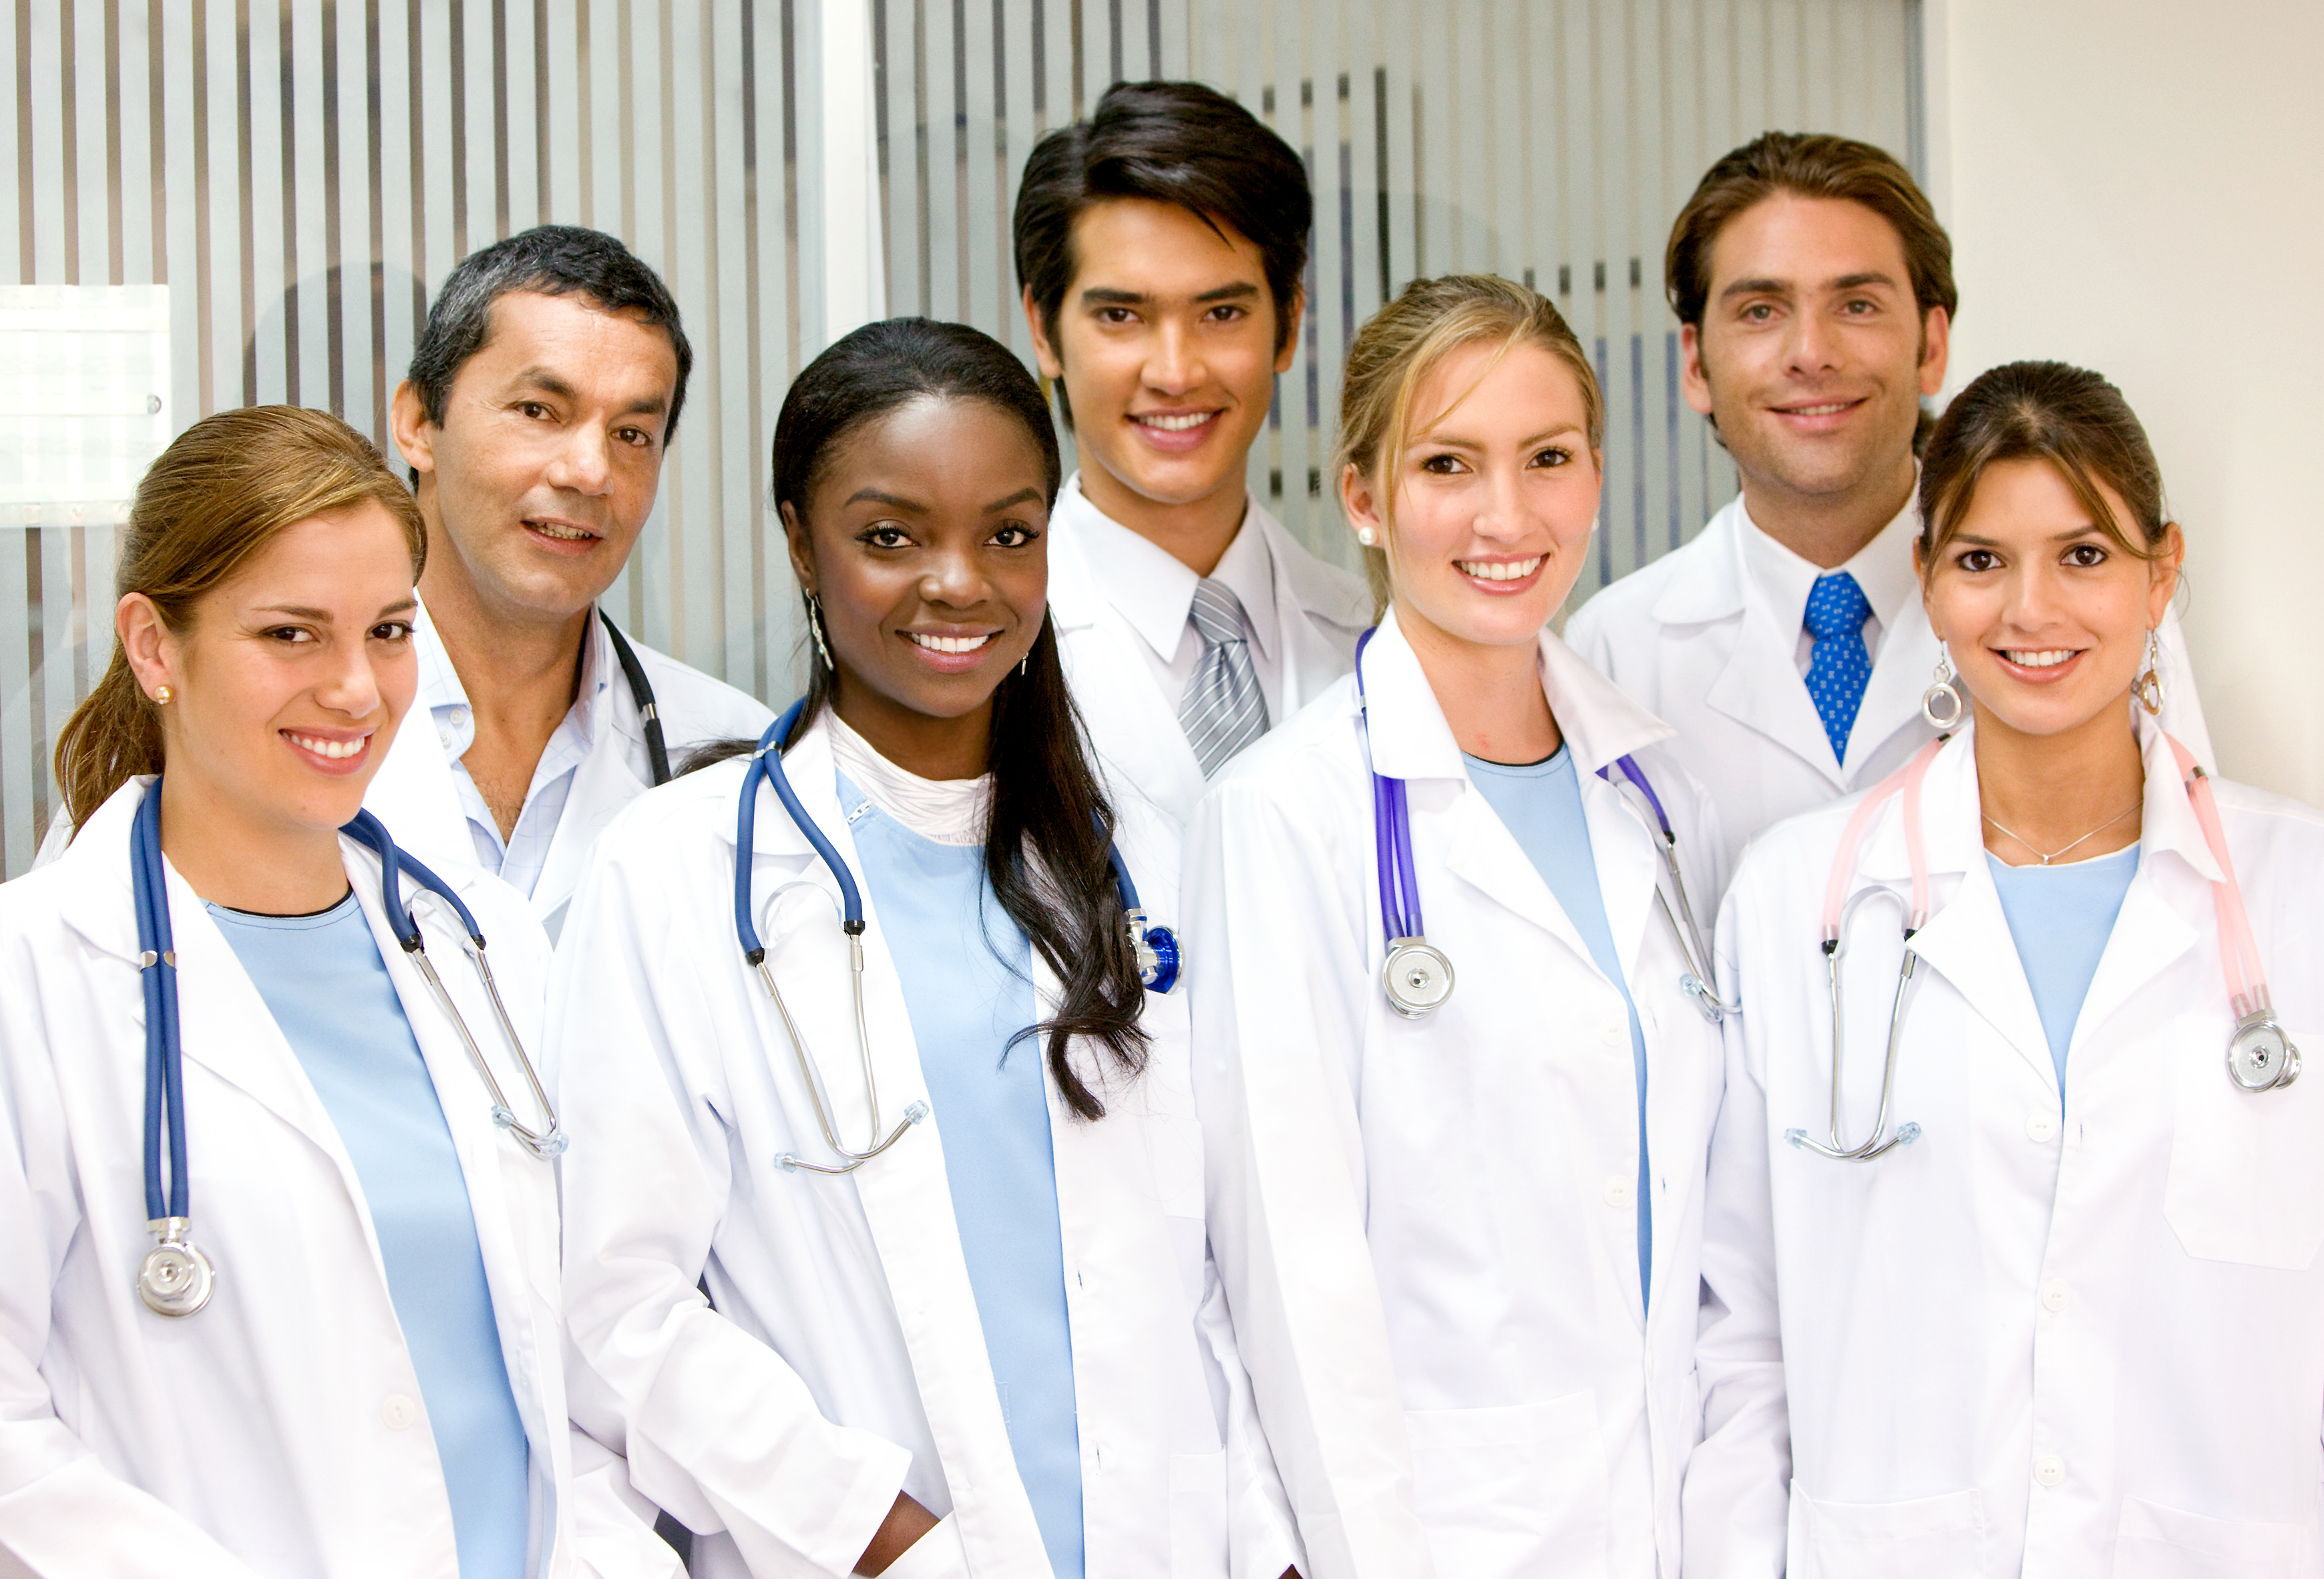 Study Medicine Abroad – ECFMG Certification for USA Residentship